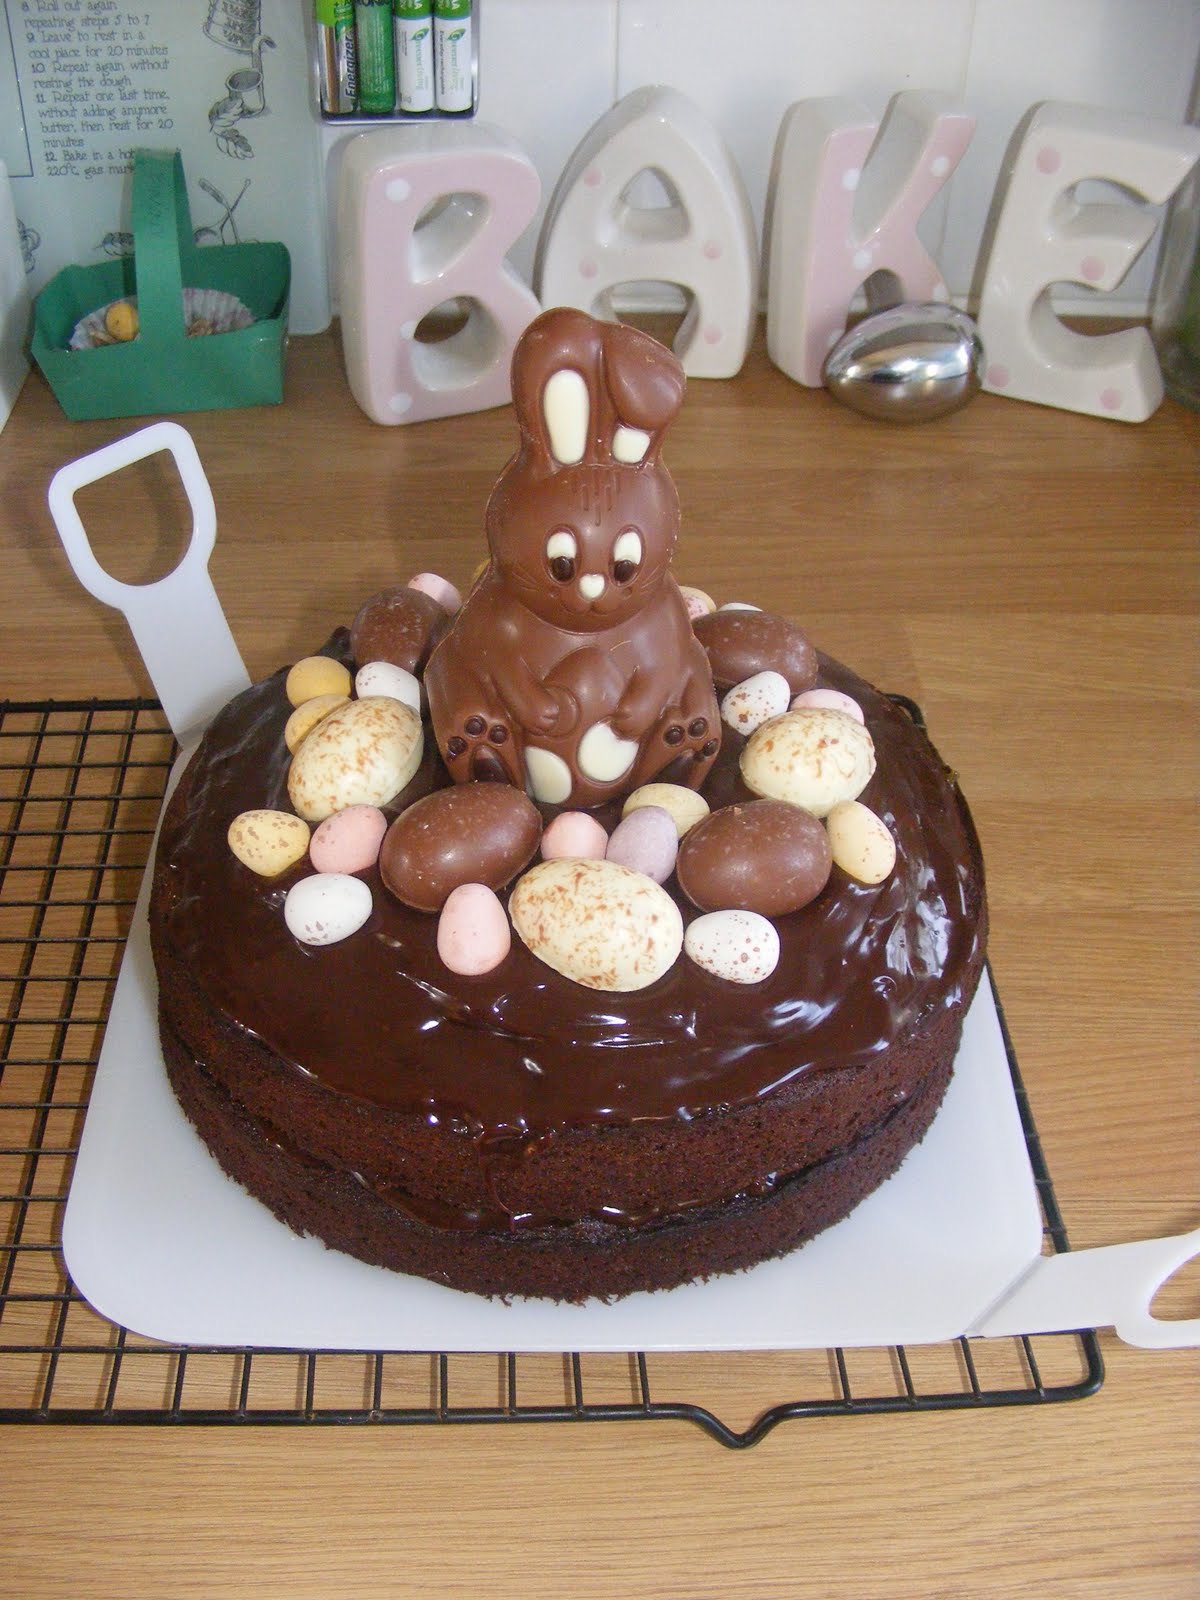 Adventures @ Play: Chocolate Easter Cake